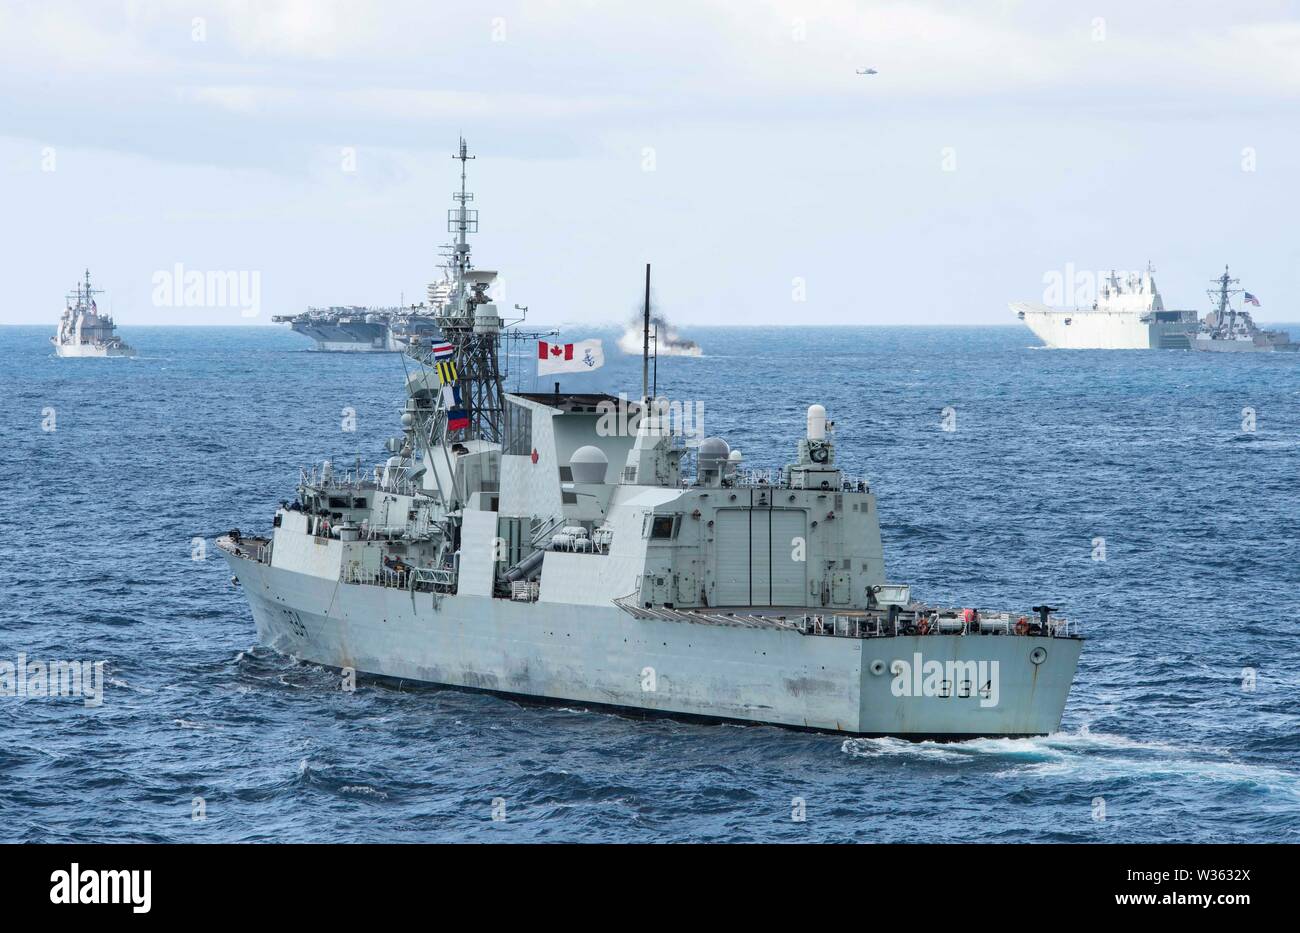 190711-N-DX072-1028 TASMAN SEA (July 11, 2019) The Royal Canadian Navy Halifax-class frigate HMCS Regina (FFH 334) transits with the amphibious transport dock ship USS Green Bay (LPD 20) in a photo exercise (PHOTOEX) during Talisman Sabre 2019. Green Bay, part of the Wasp Expeditionary Strike Group, with embarked 31st Marine Expeditionary Unit, is currently participating in Talisman Sabre 2019 off the coast of Northern Australia. A bilateral, biennial event, Talisman Sabre is designed to improve U.S. and Australian combat training, readiness and interoperability through realistic, relevant tra Stock Photo